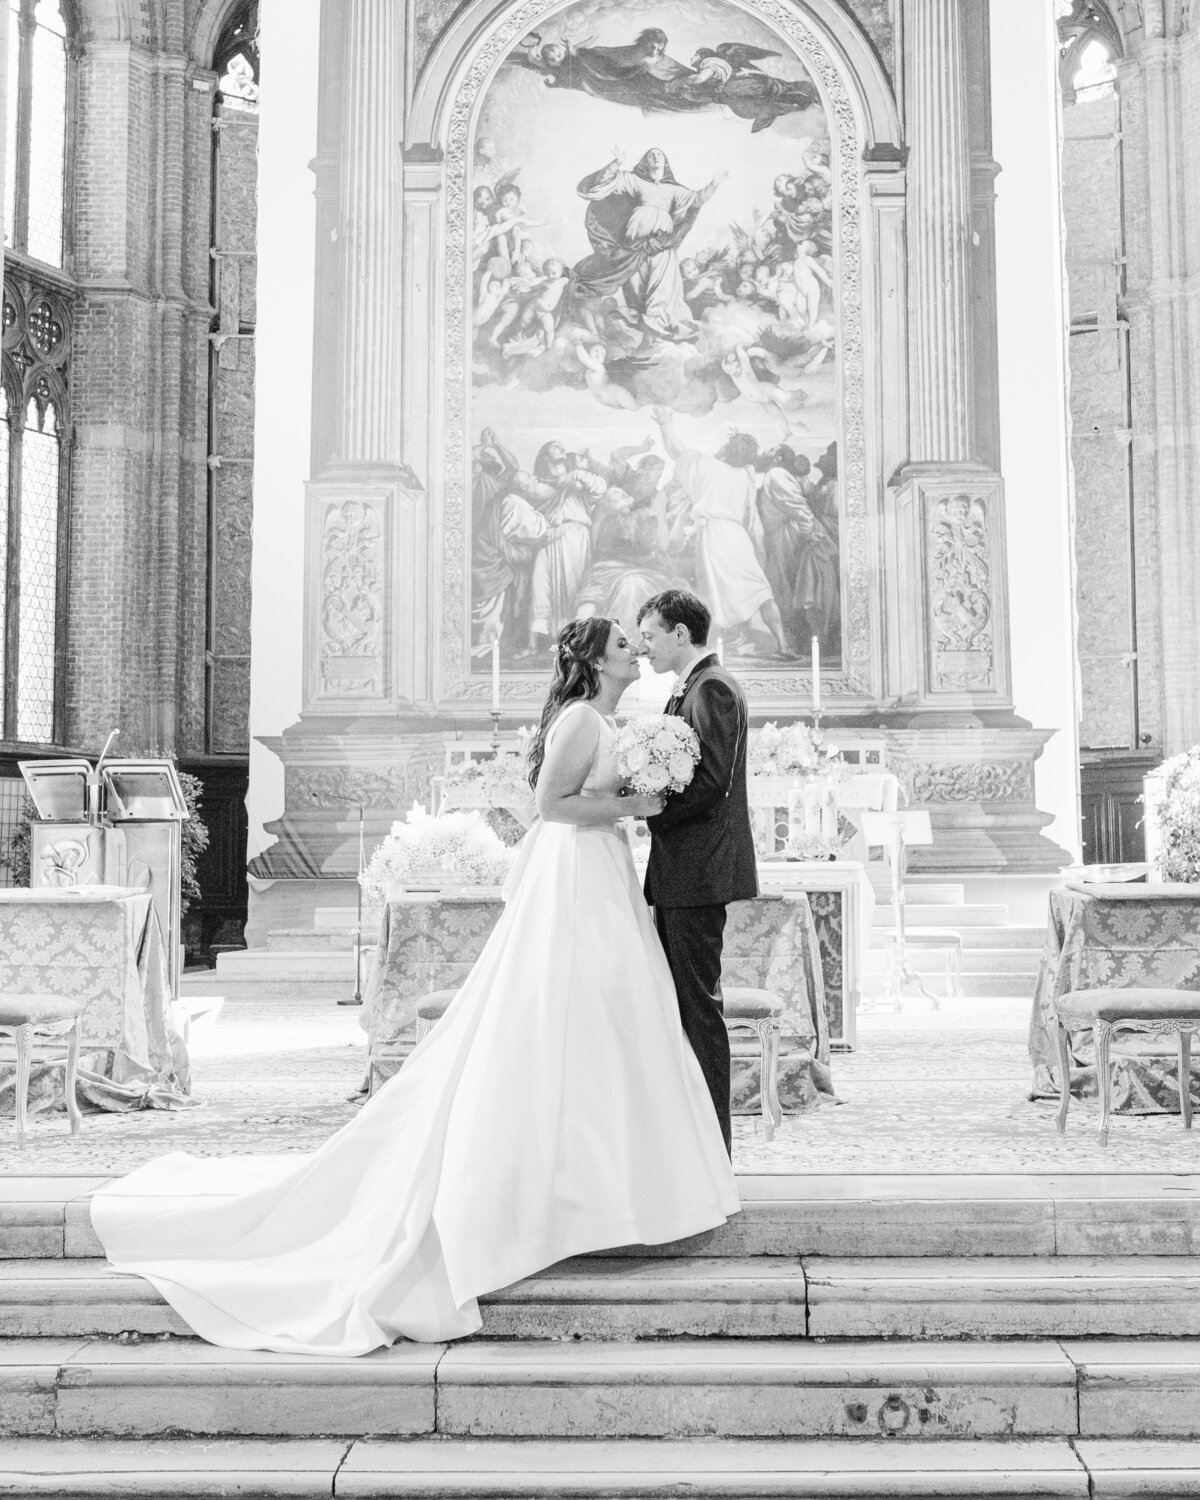 Bride and groom's first kiss in Venice wedding